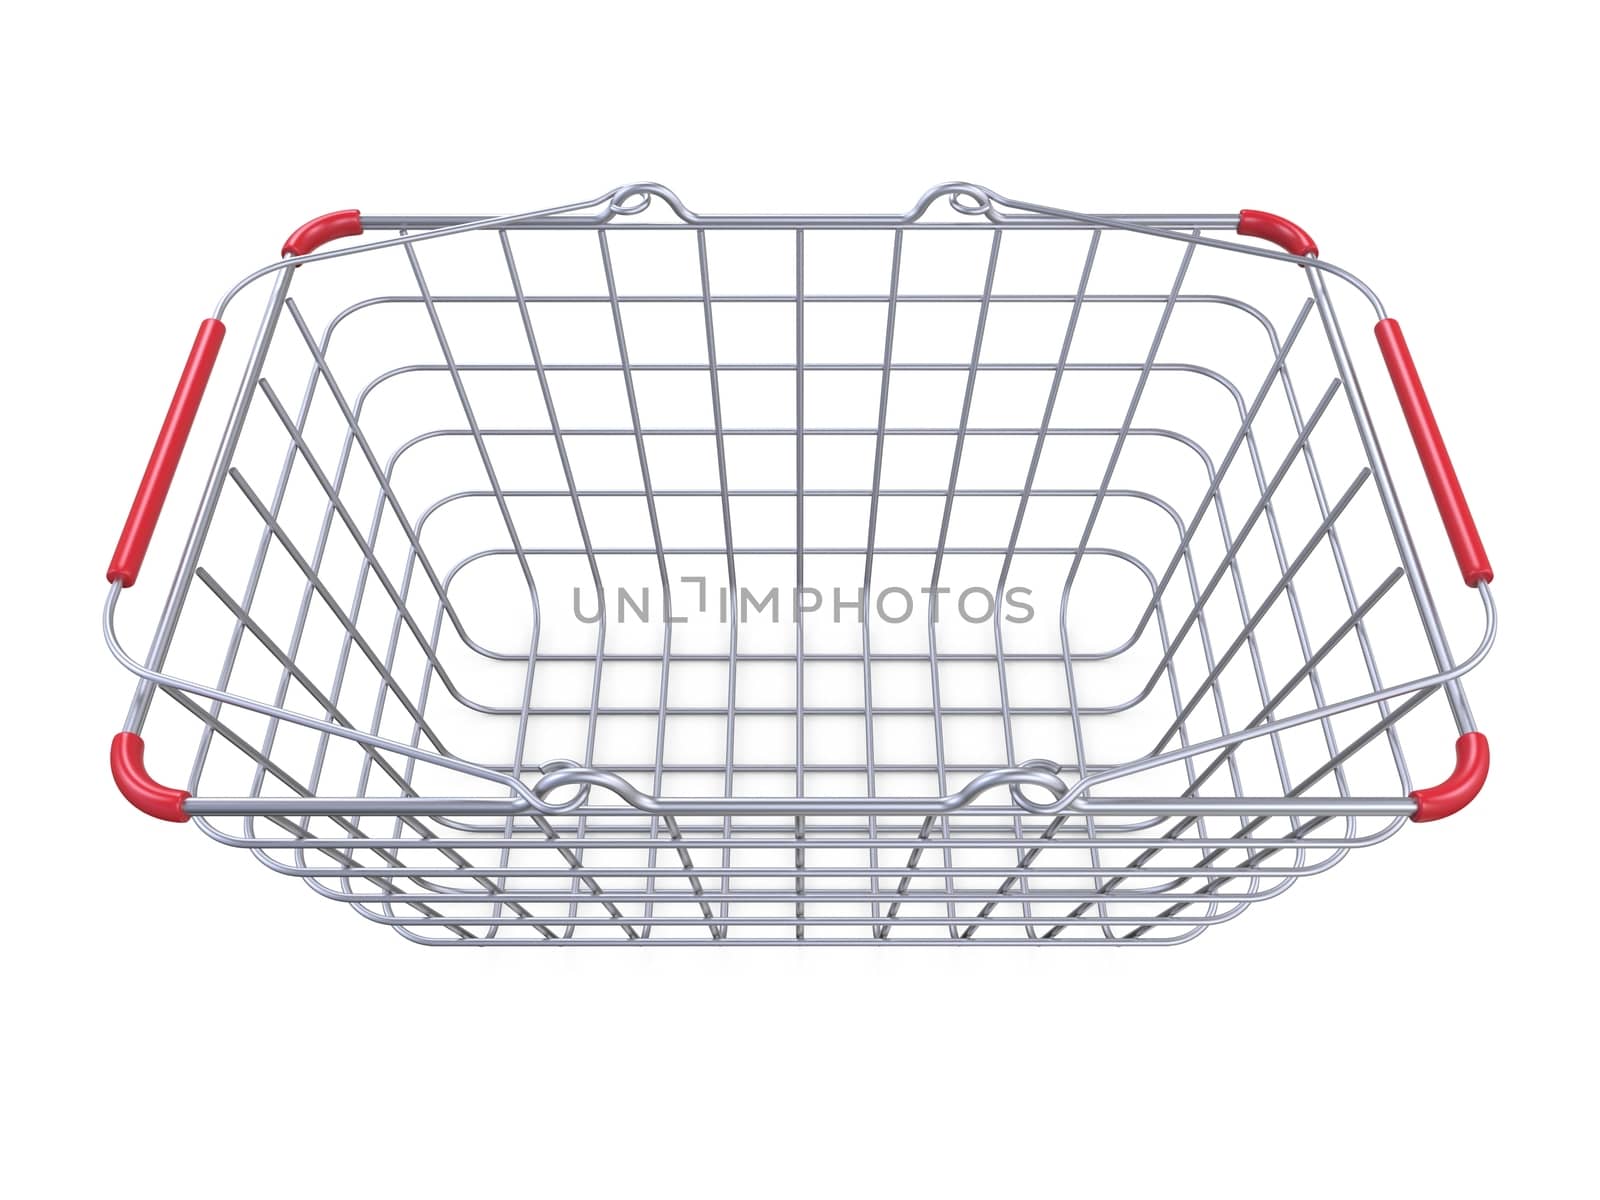 Metal shopping basket side view 3D render illustration isolated on white background